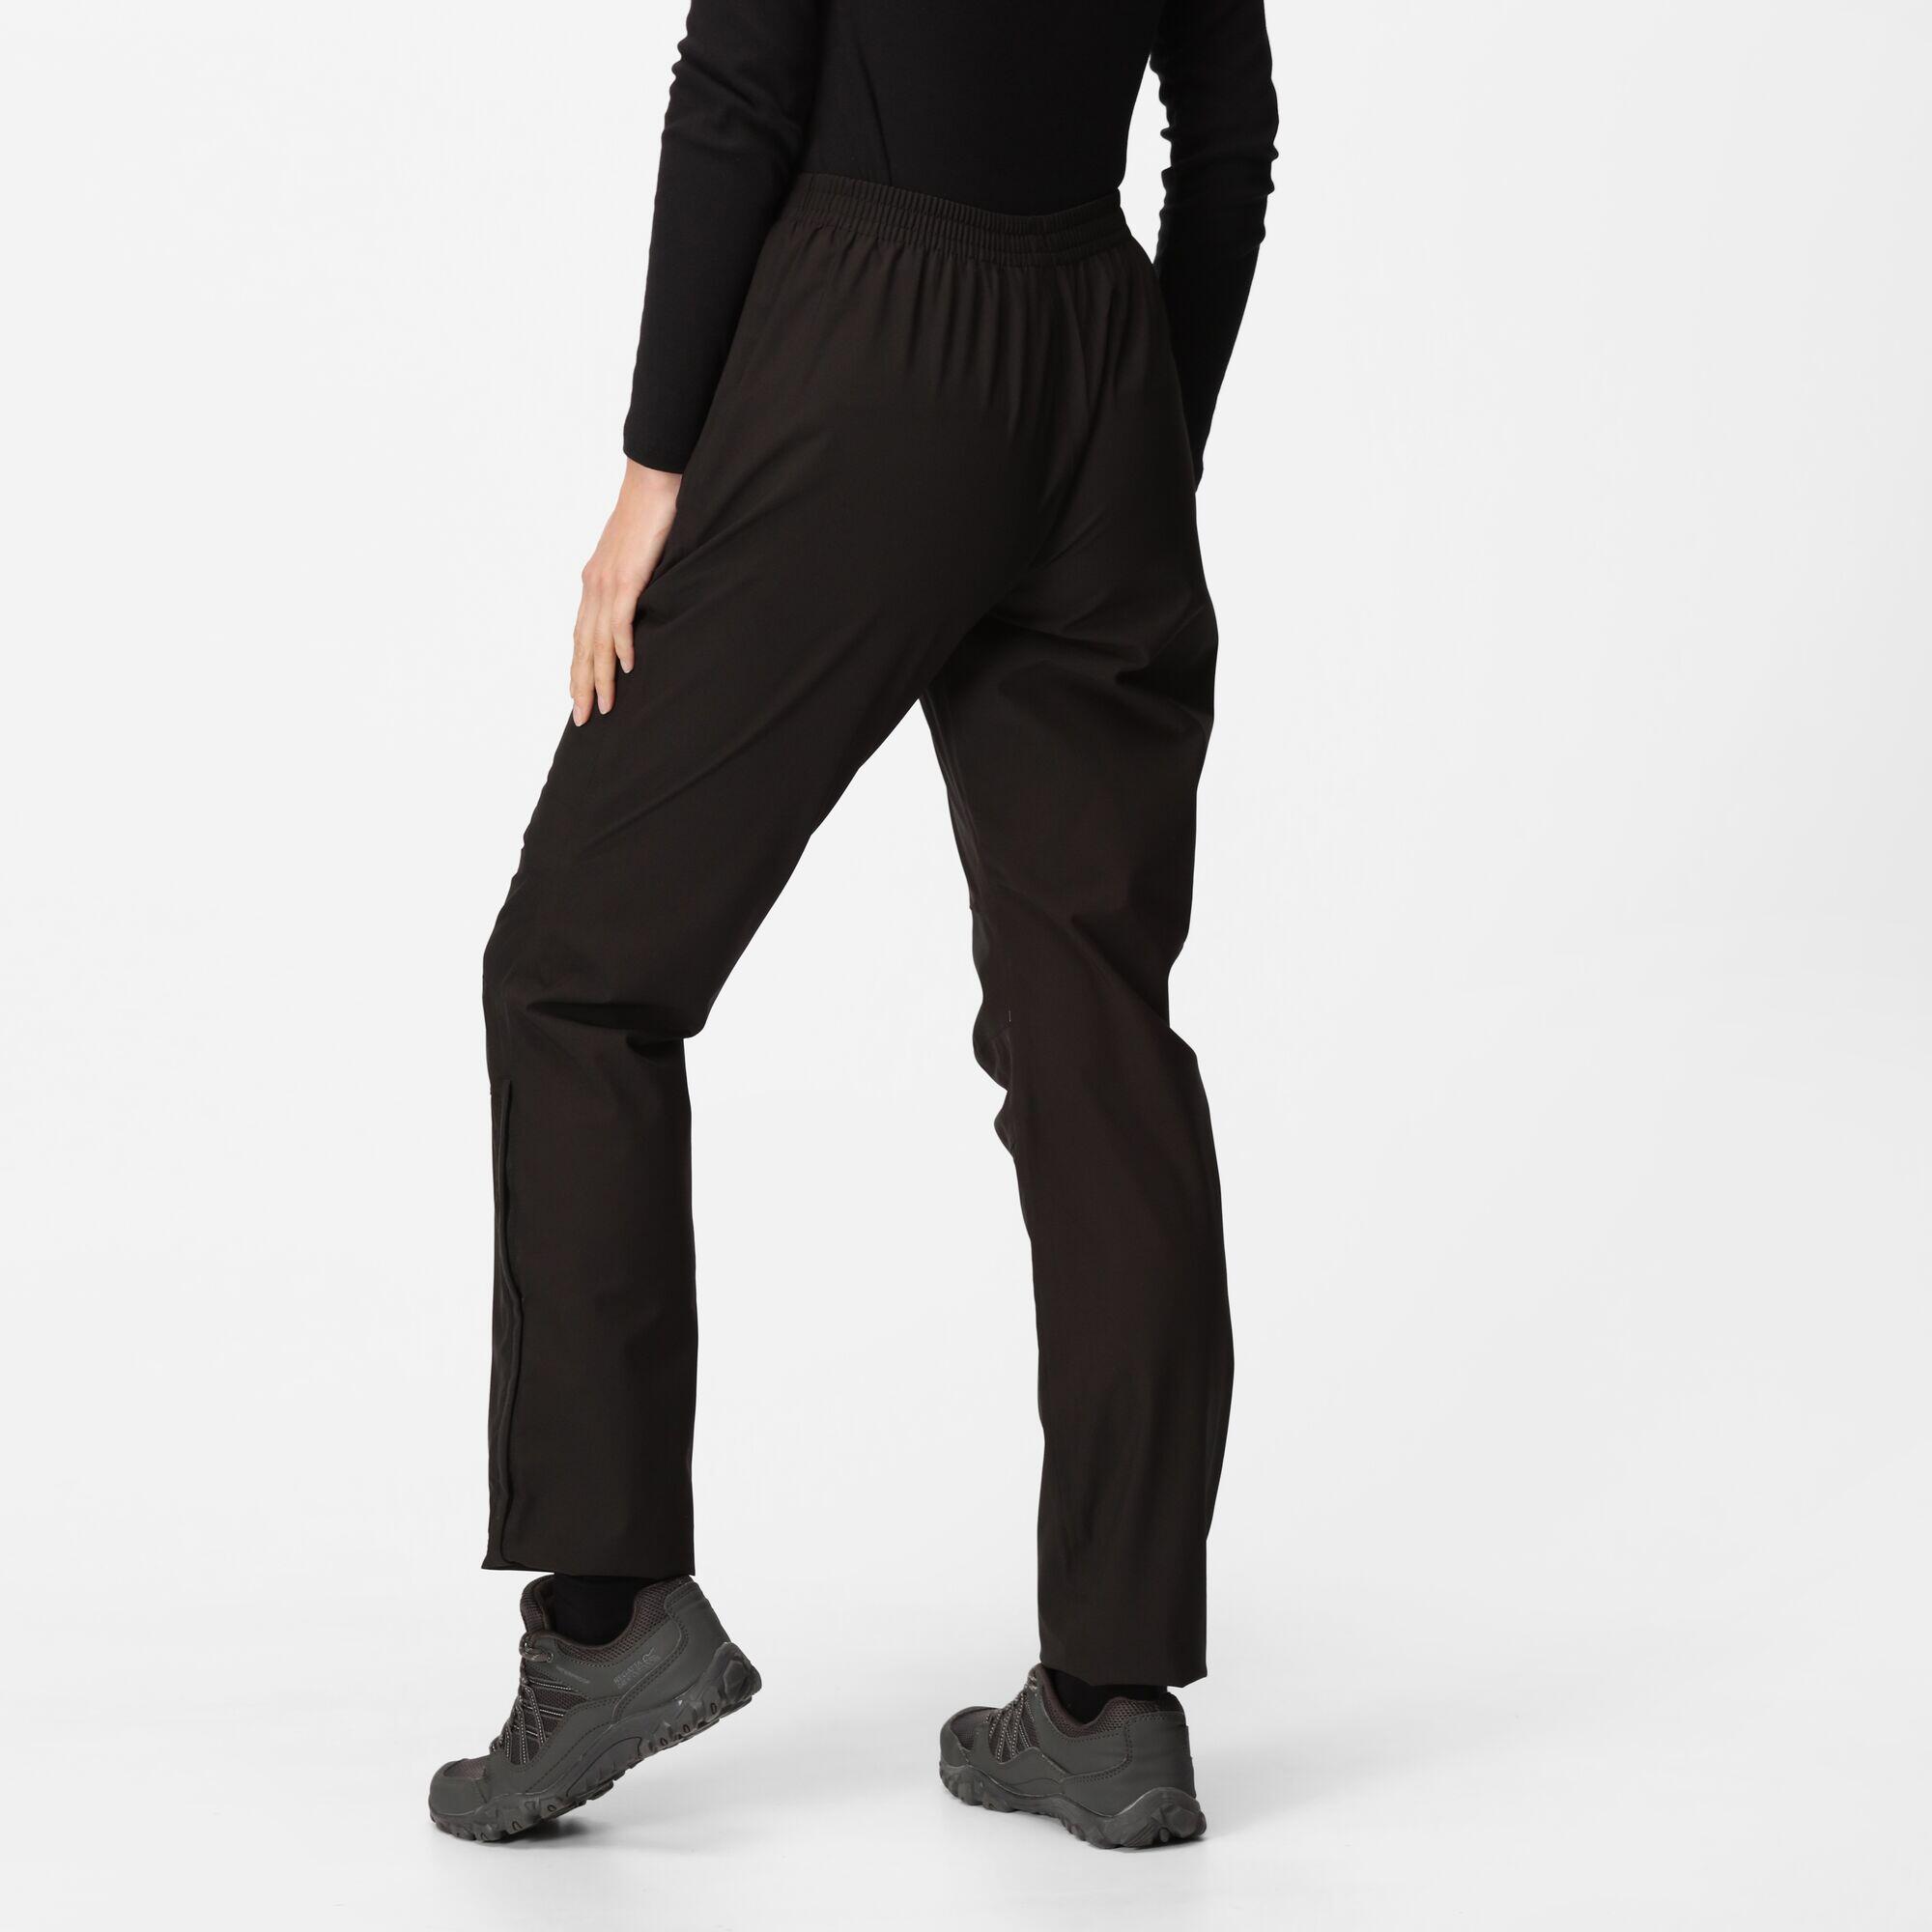 Highton Stretch Women's Hiking Overtrousers - Black 2/5